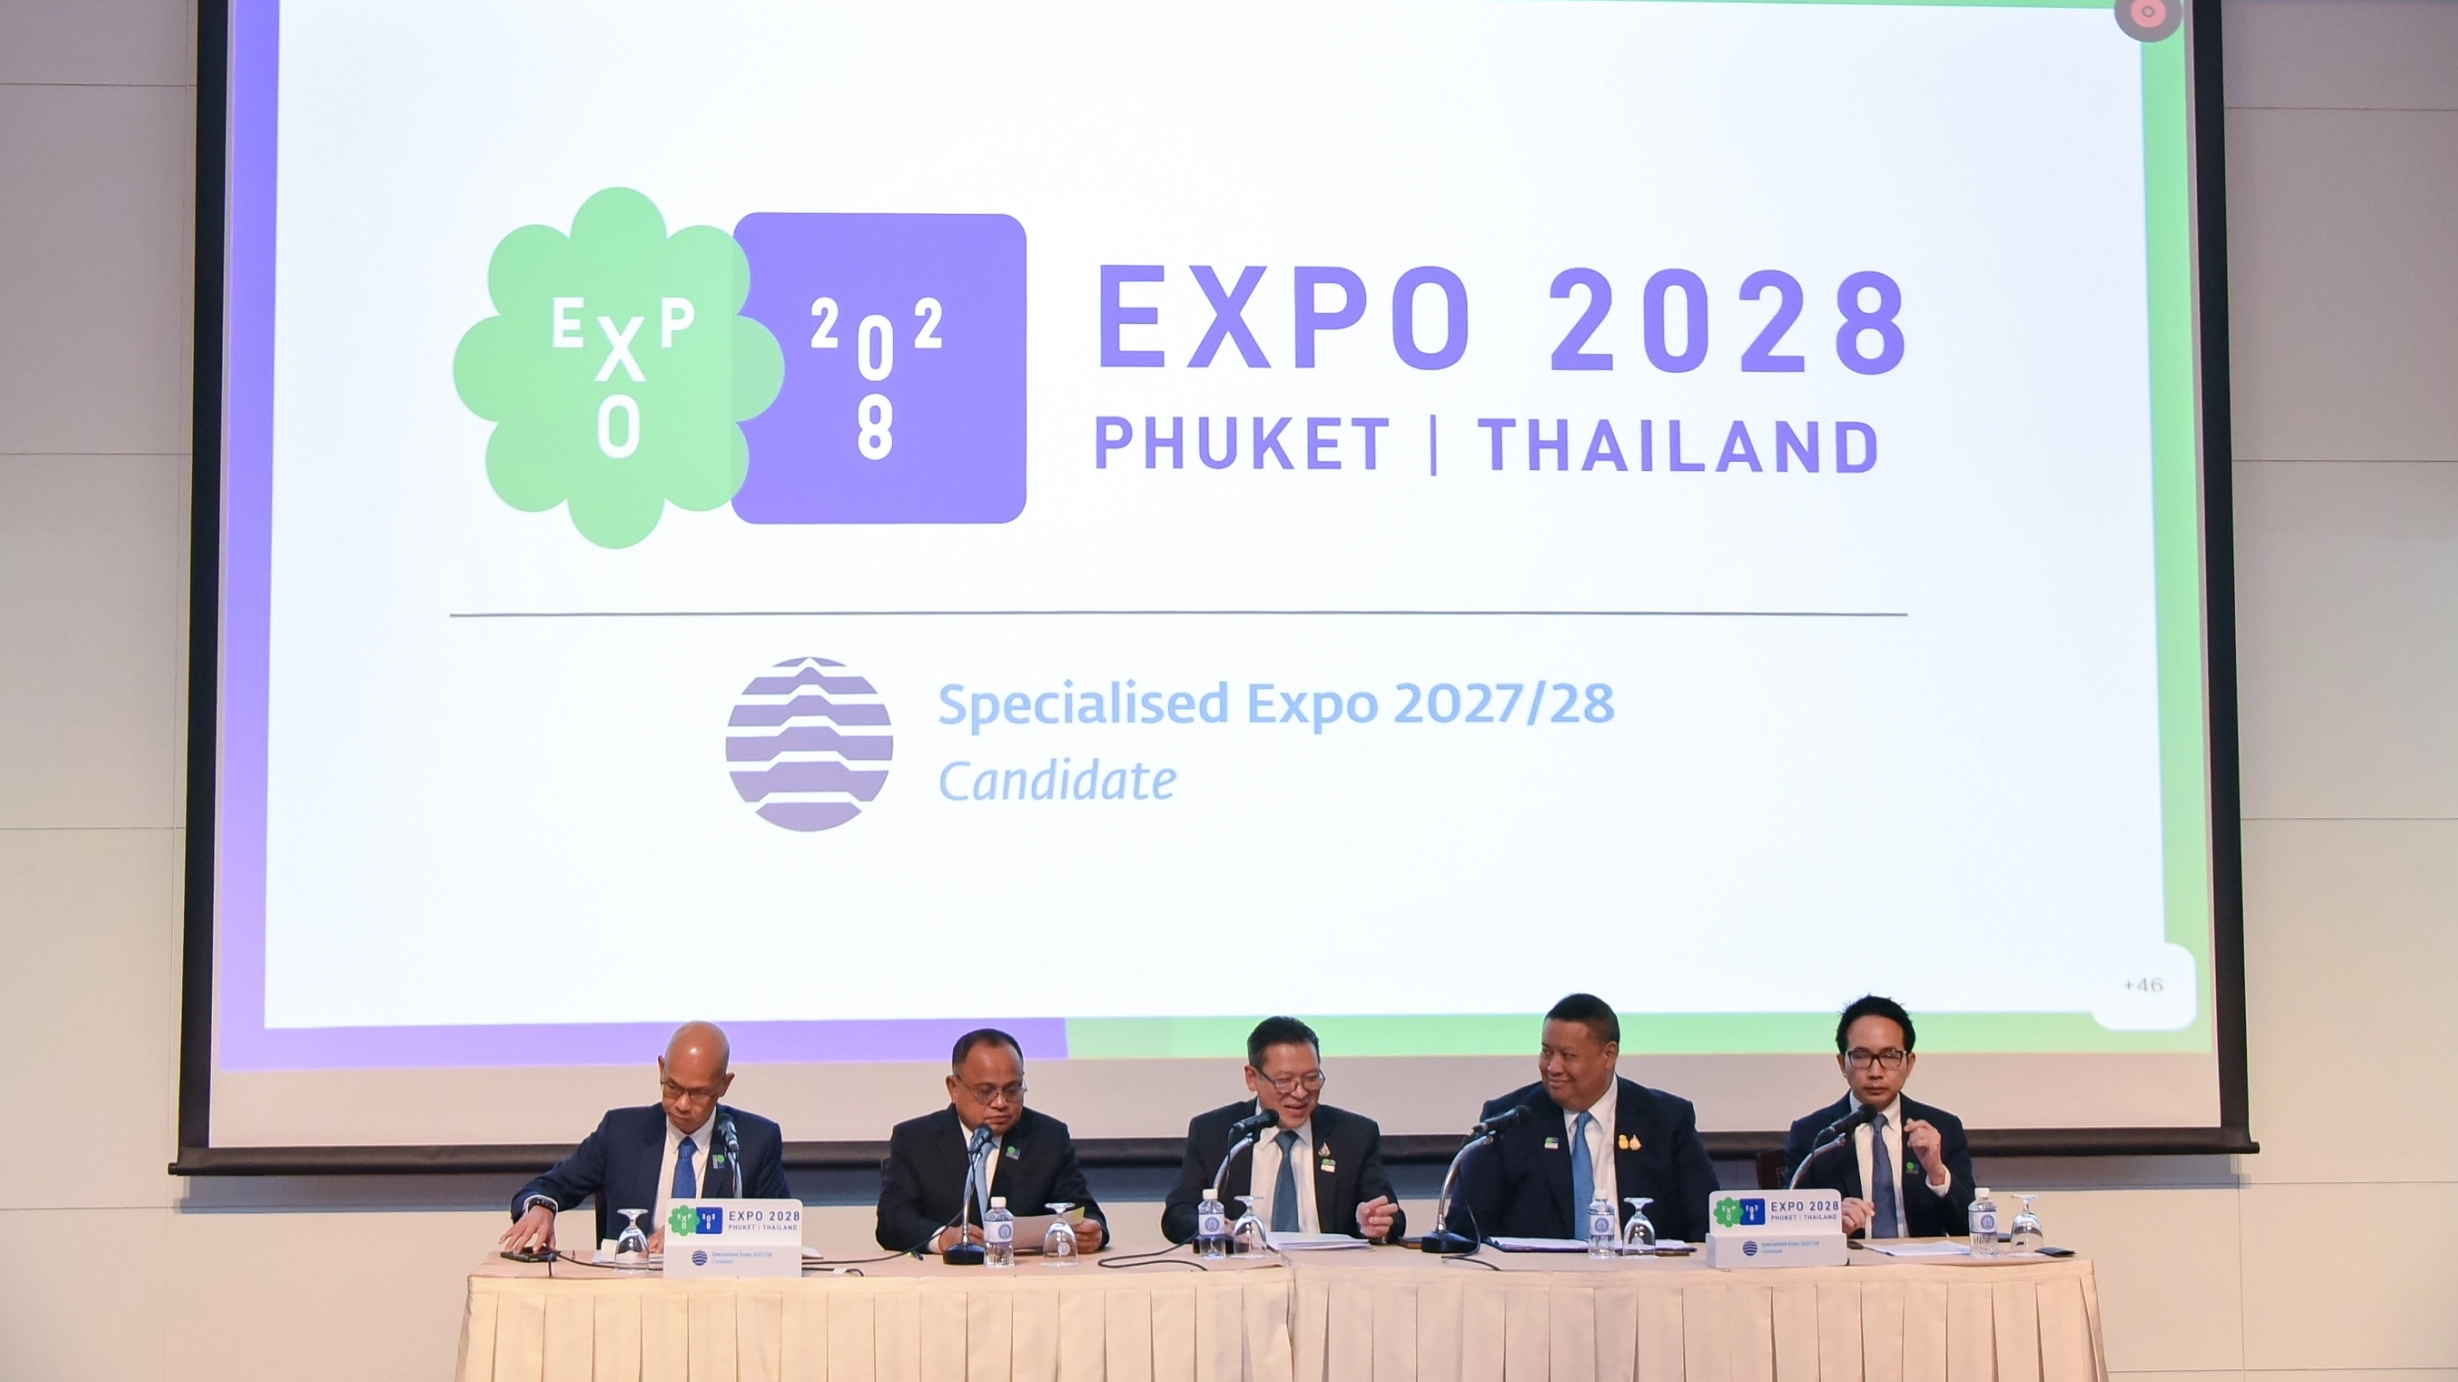 Thailand presents its ongoing commitment to hosting Expo 2028 – Phuket